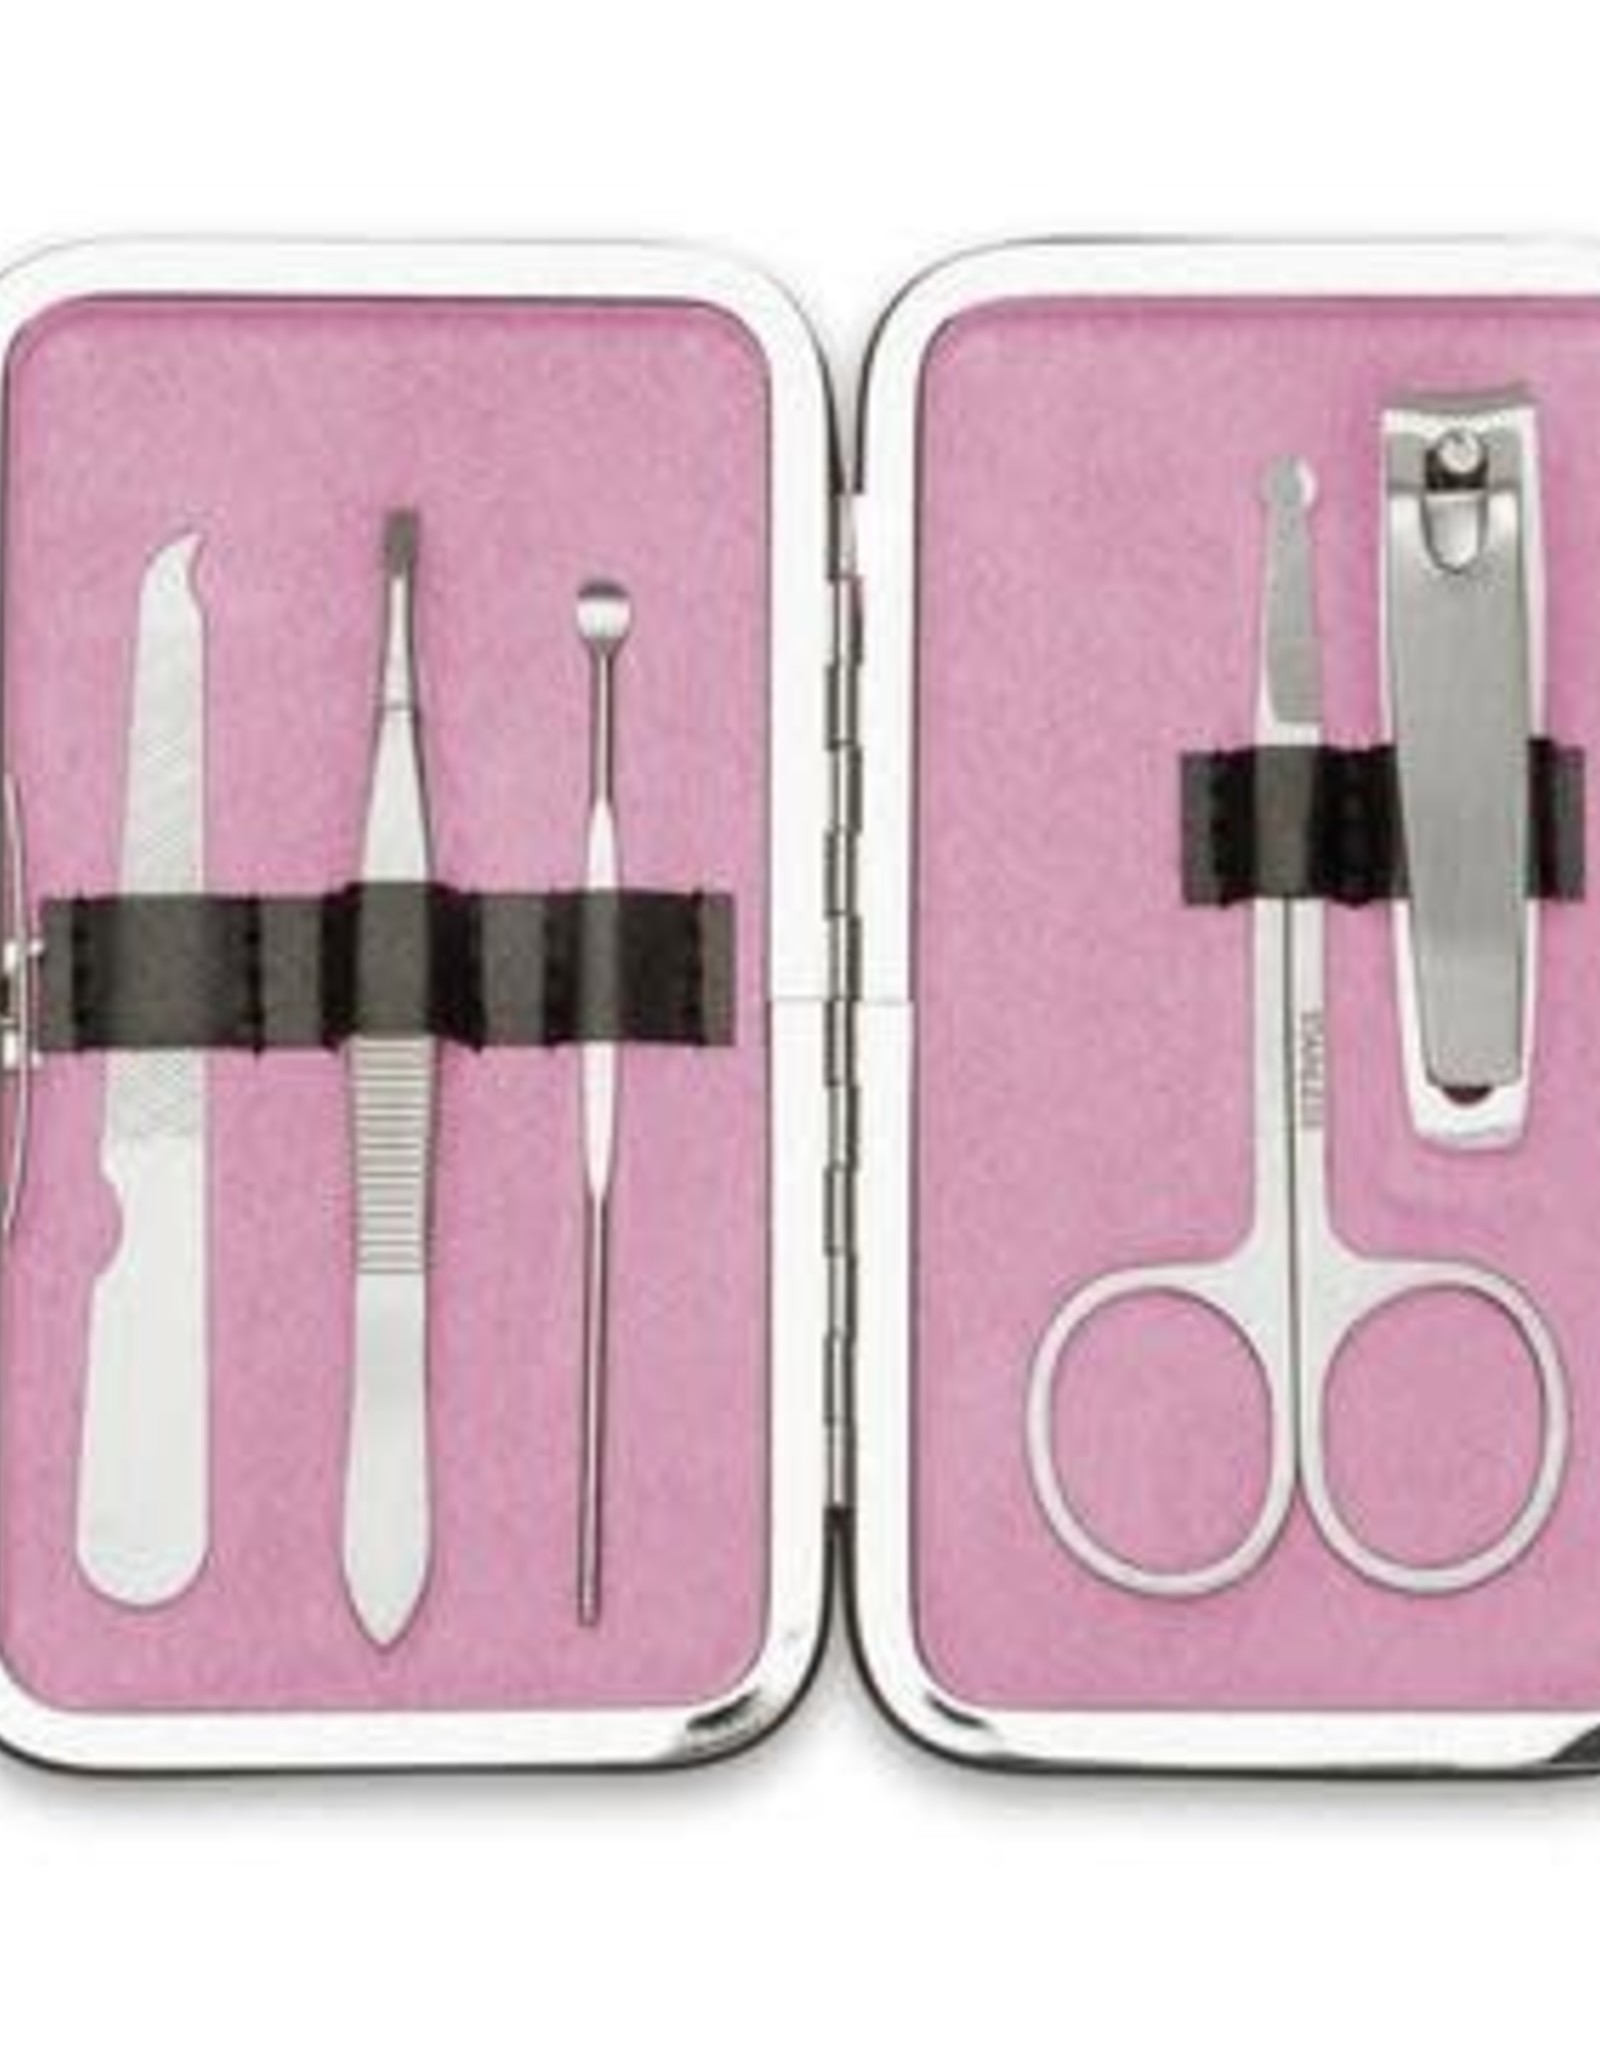 Home Shannon Road - You are Amazing Manicure Set